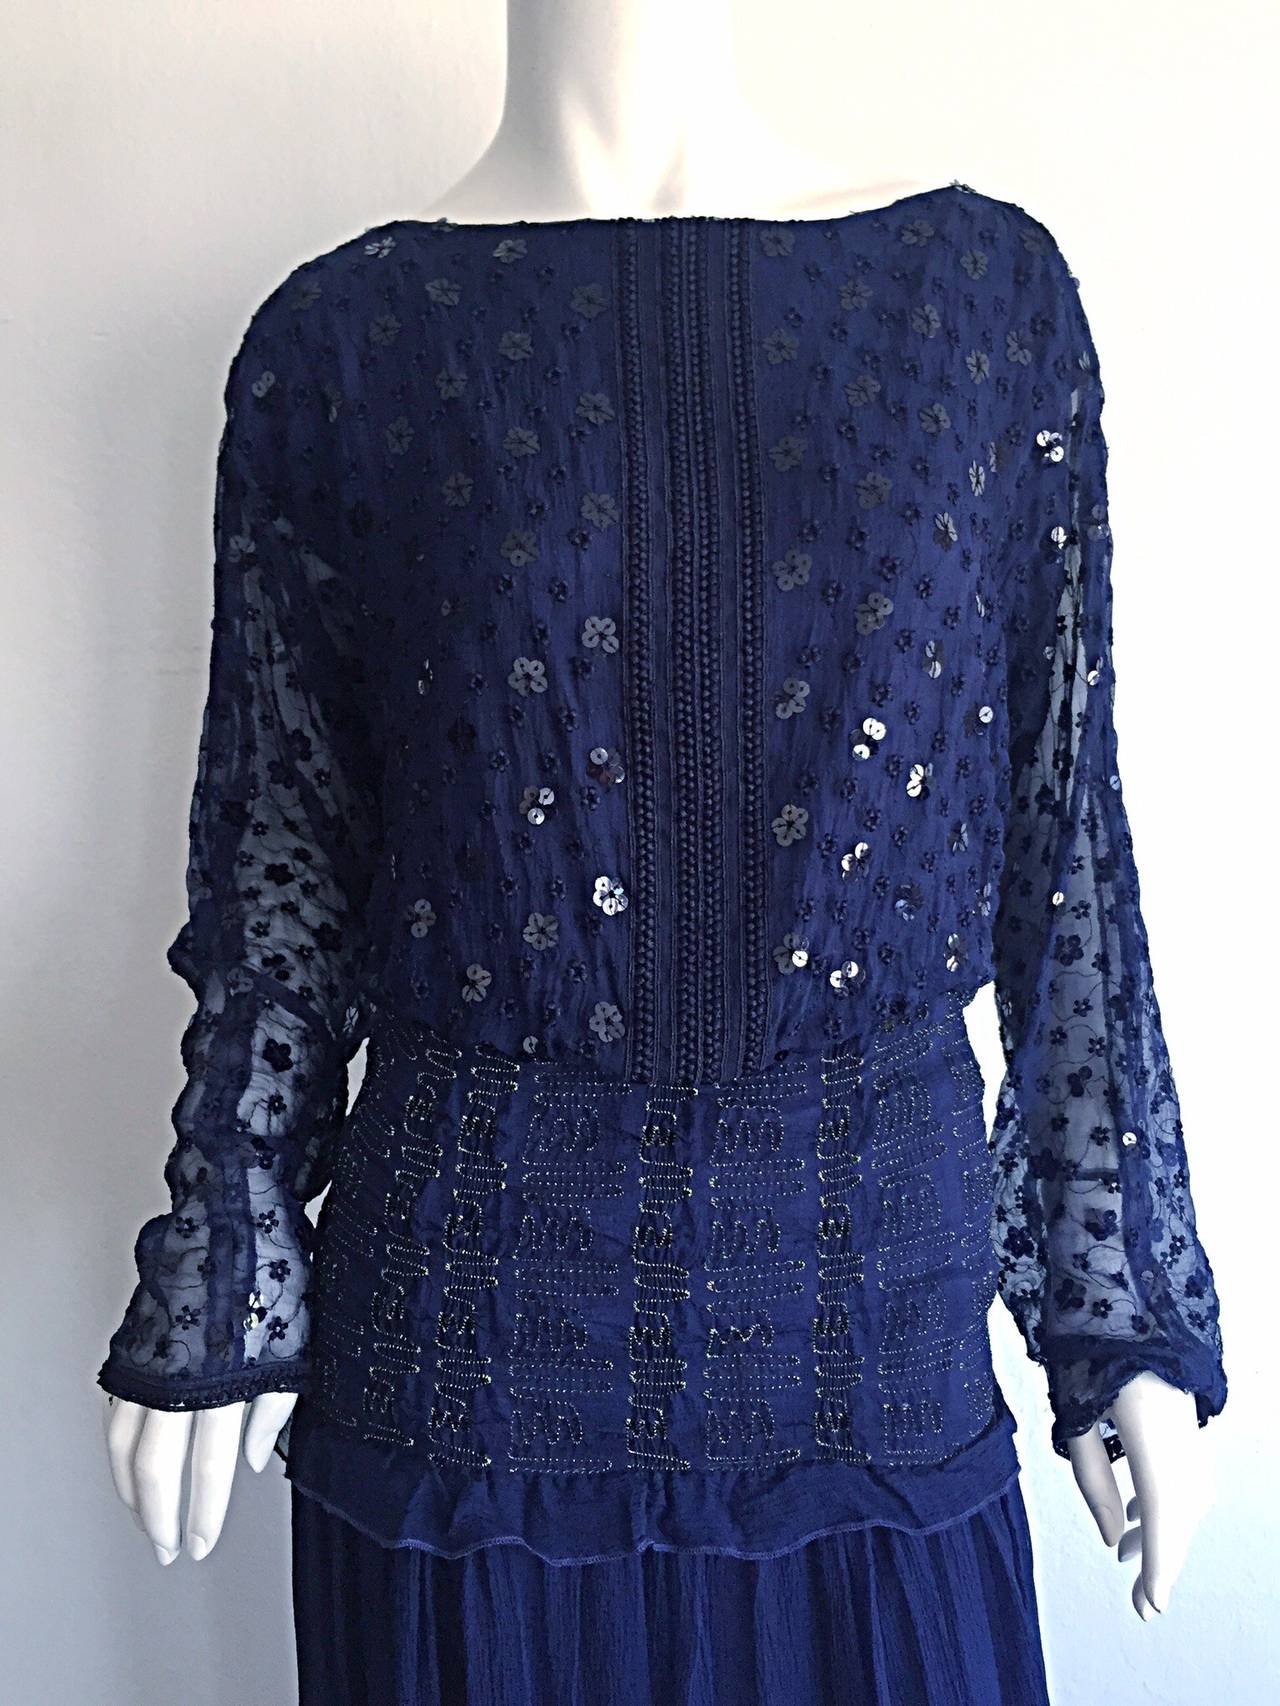 Gorgeous vintage Marian Clayden for Bergdorf Goodman navy blue silk chiffon Bohemian dress! Eyelets throughout the front and back bodice, with black sequins in shapes of flowers. Intricate black embroidery down the front center. Dolman sleeves.